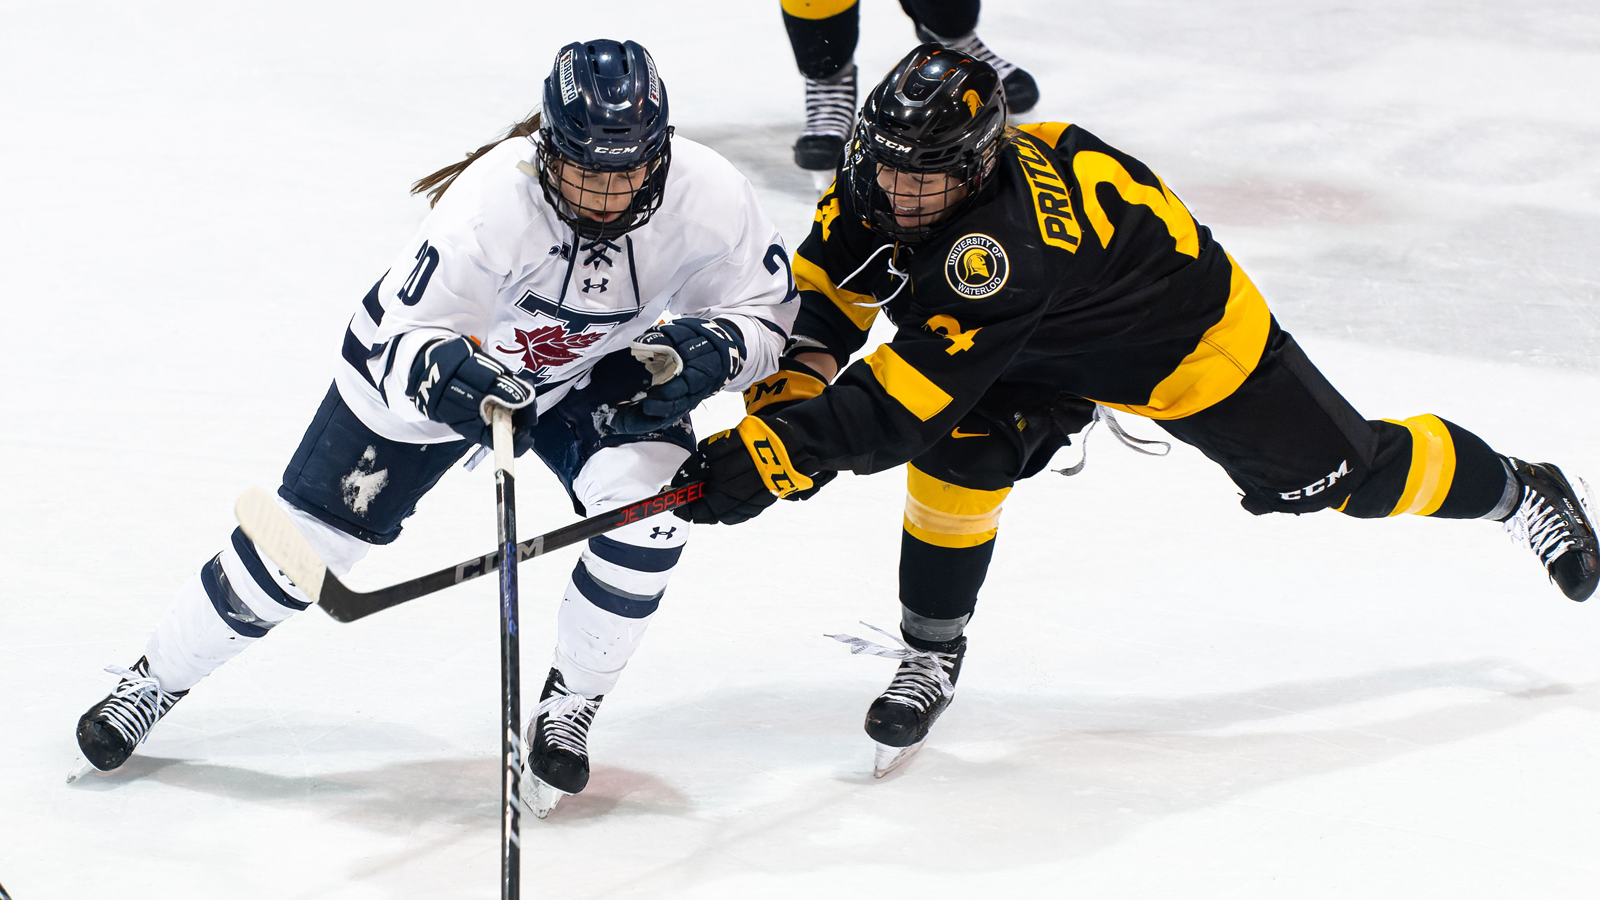 Women's hockey player from Toronto and Waterloo, respectively, competing for the puck during a game